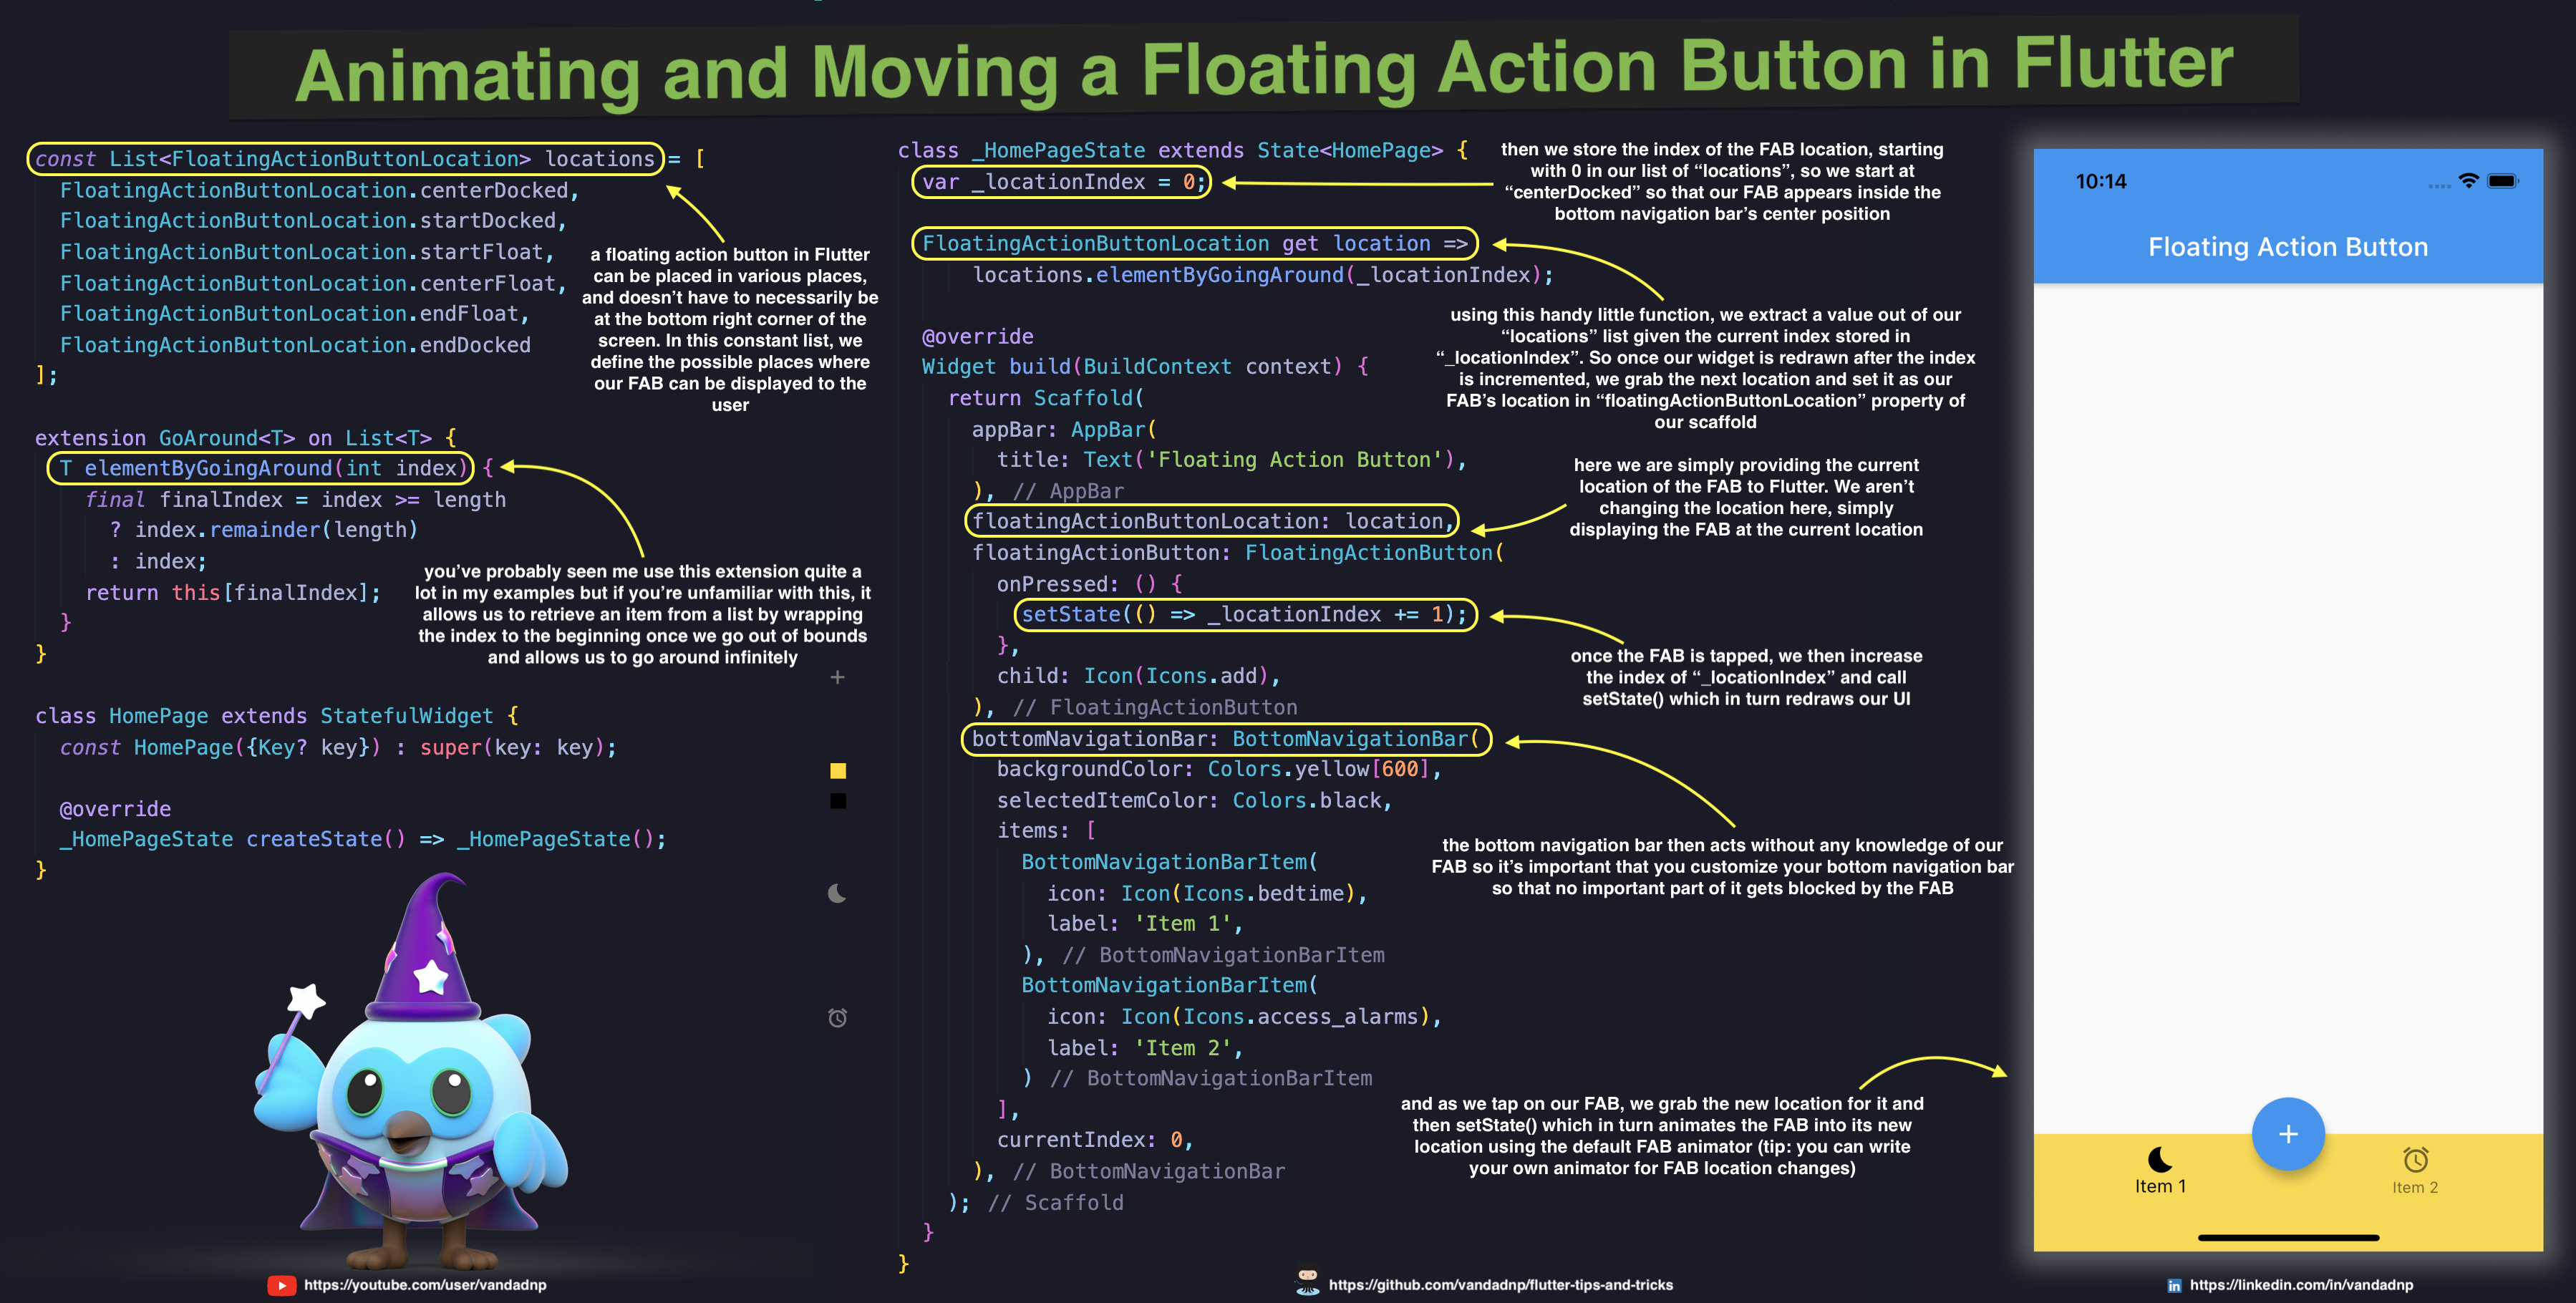 animating-and-moving-a-floating-action-button-in-flutter.jpg